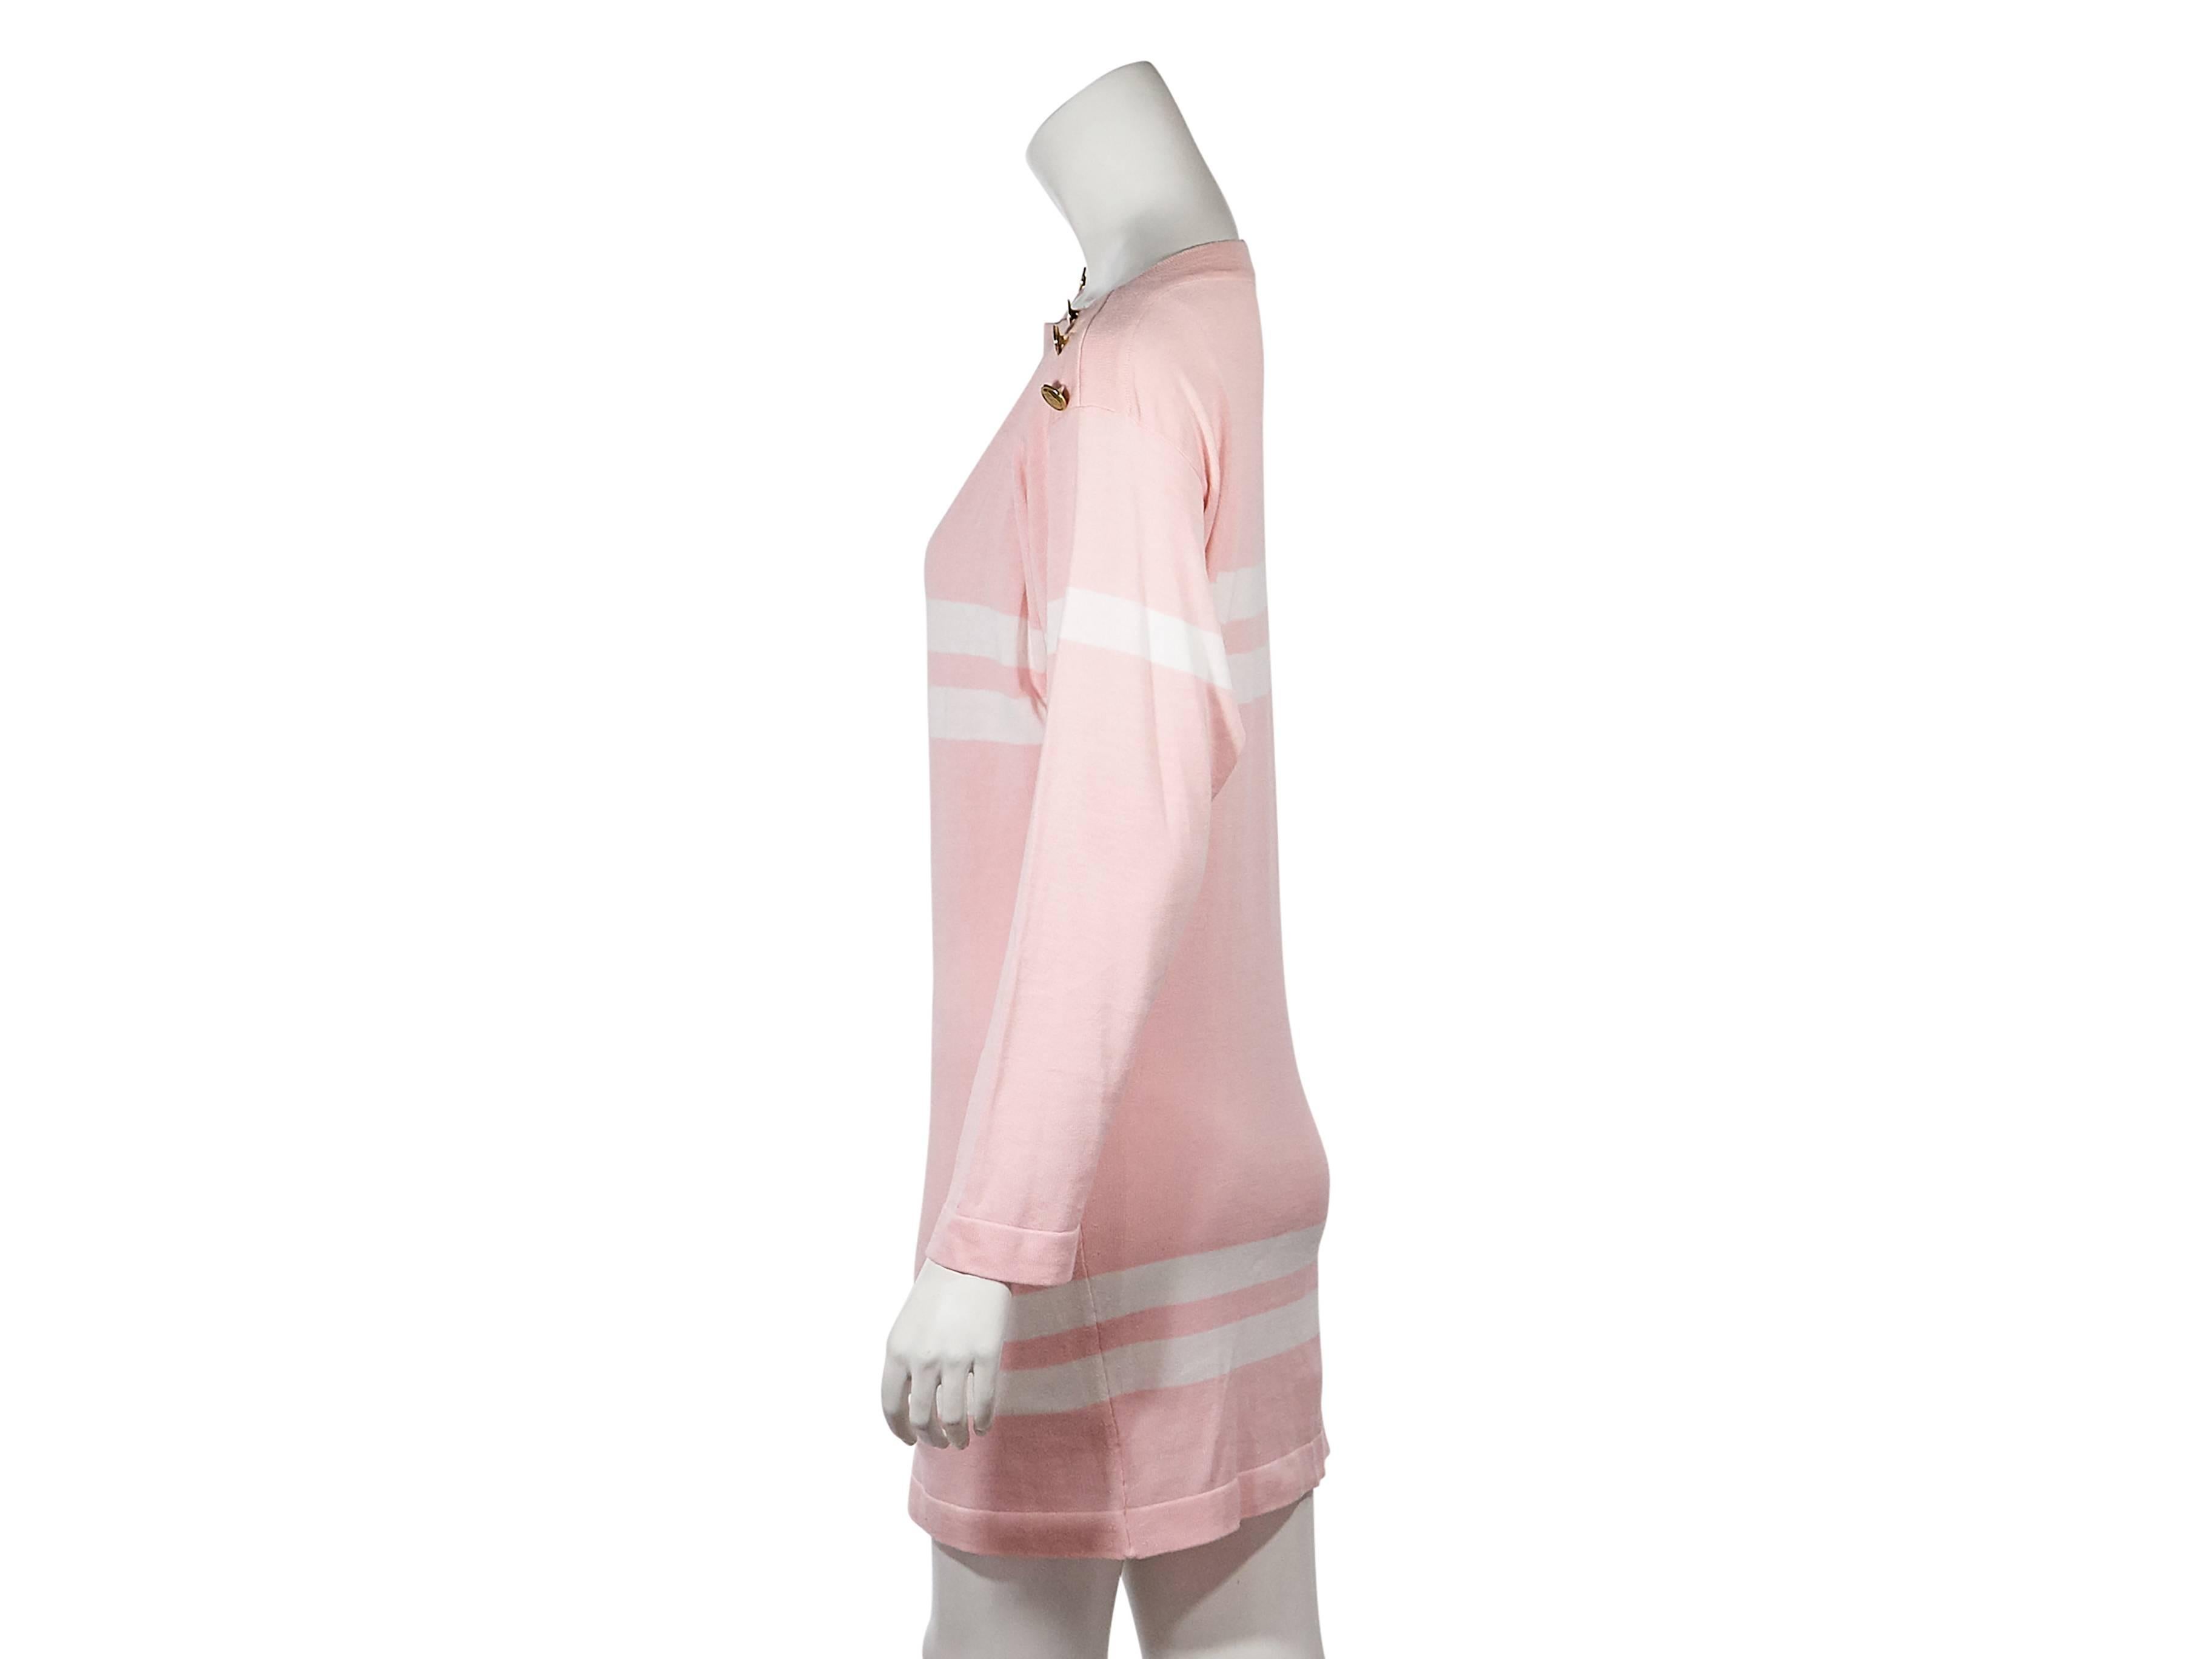 Product details:  Pink and white striped sweater dress by Chanel.  Boatneck.  Long sleeves.  Ribbed cuffs.  Button details accent shoulders.  Pullover style.  
Condition: Very good. 
Est. Retail $ 980.00